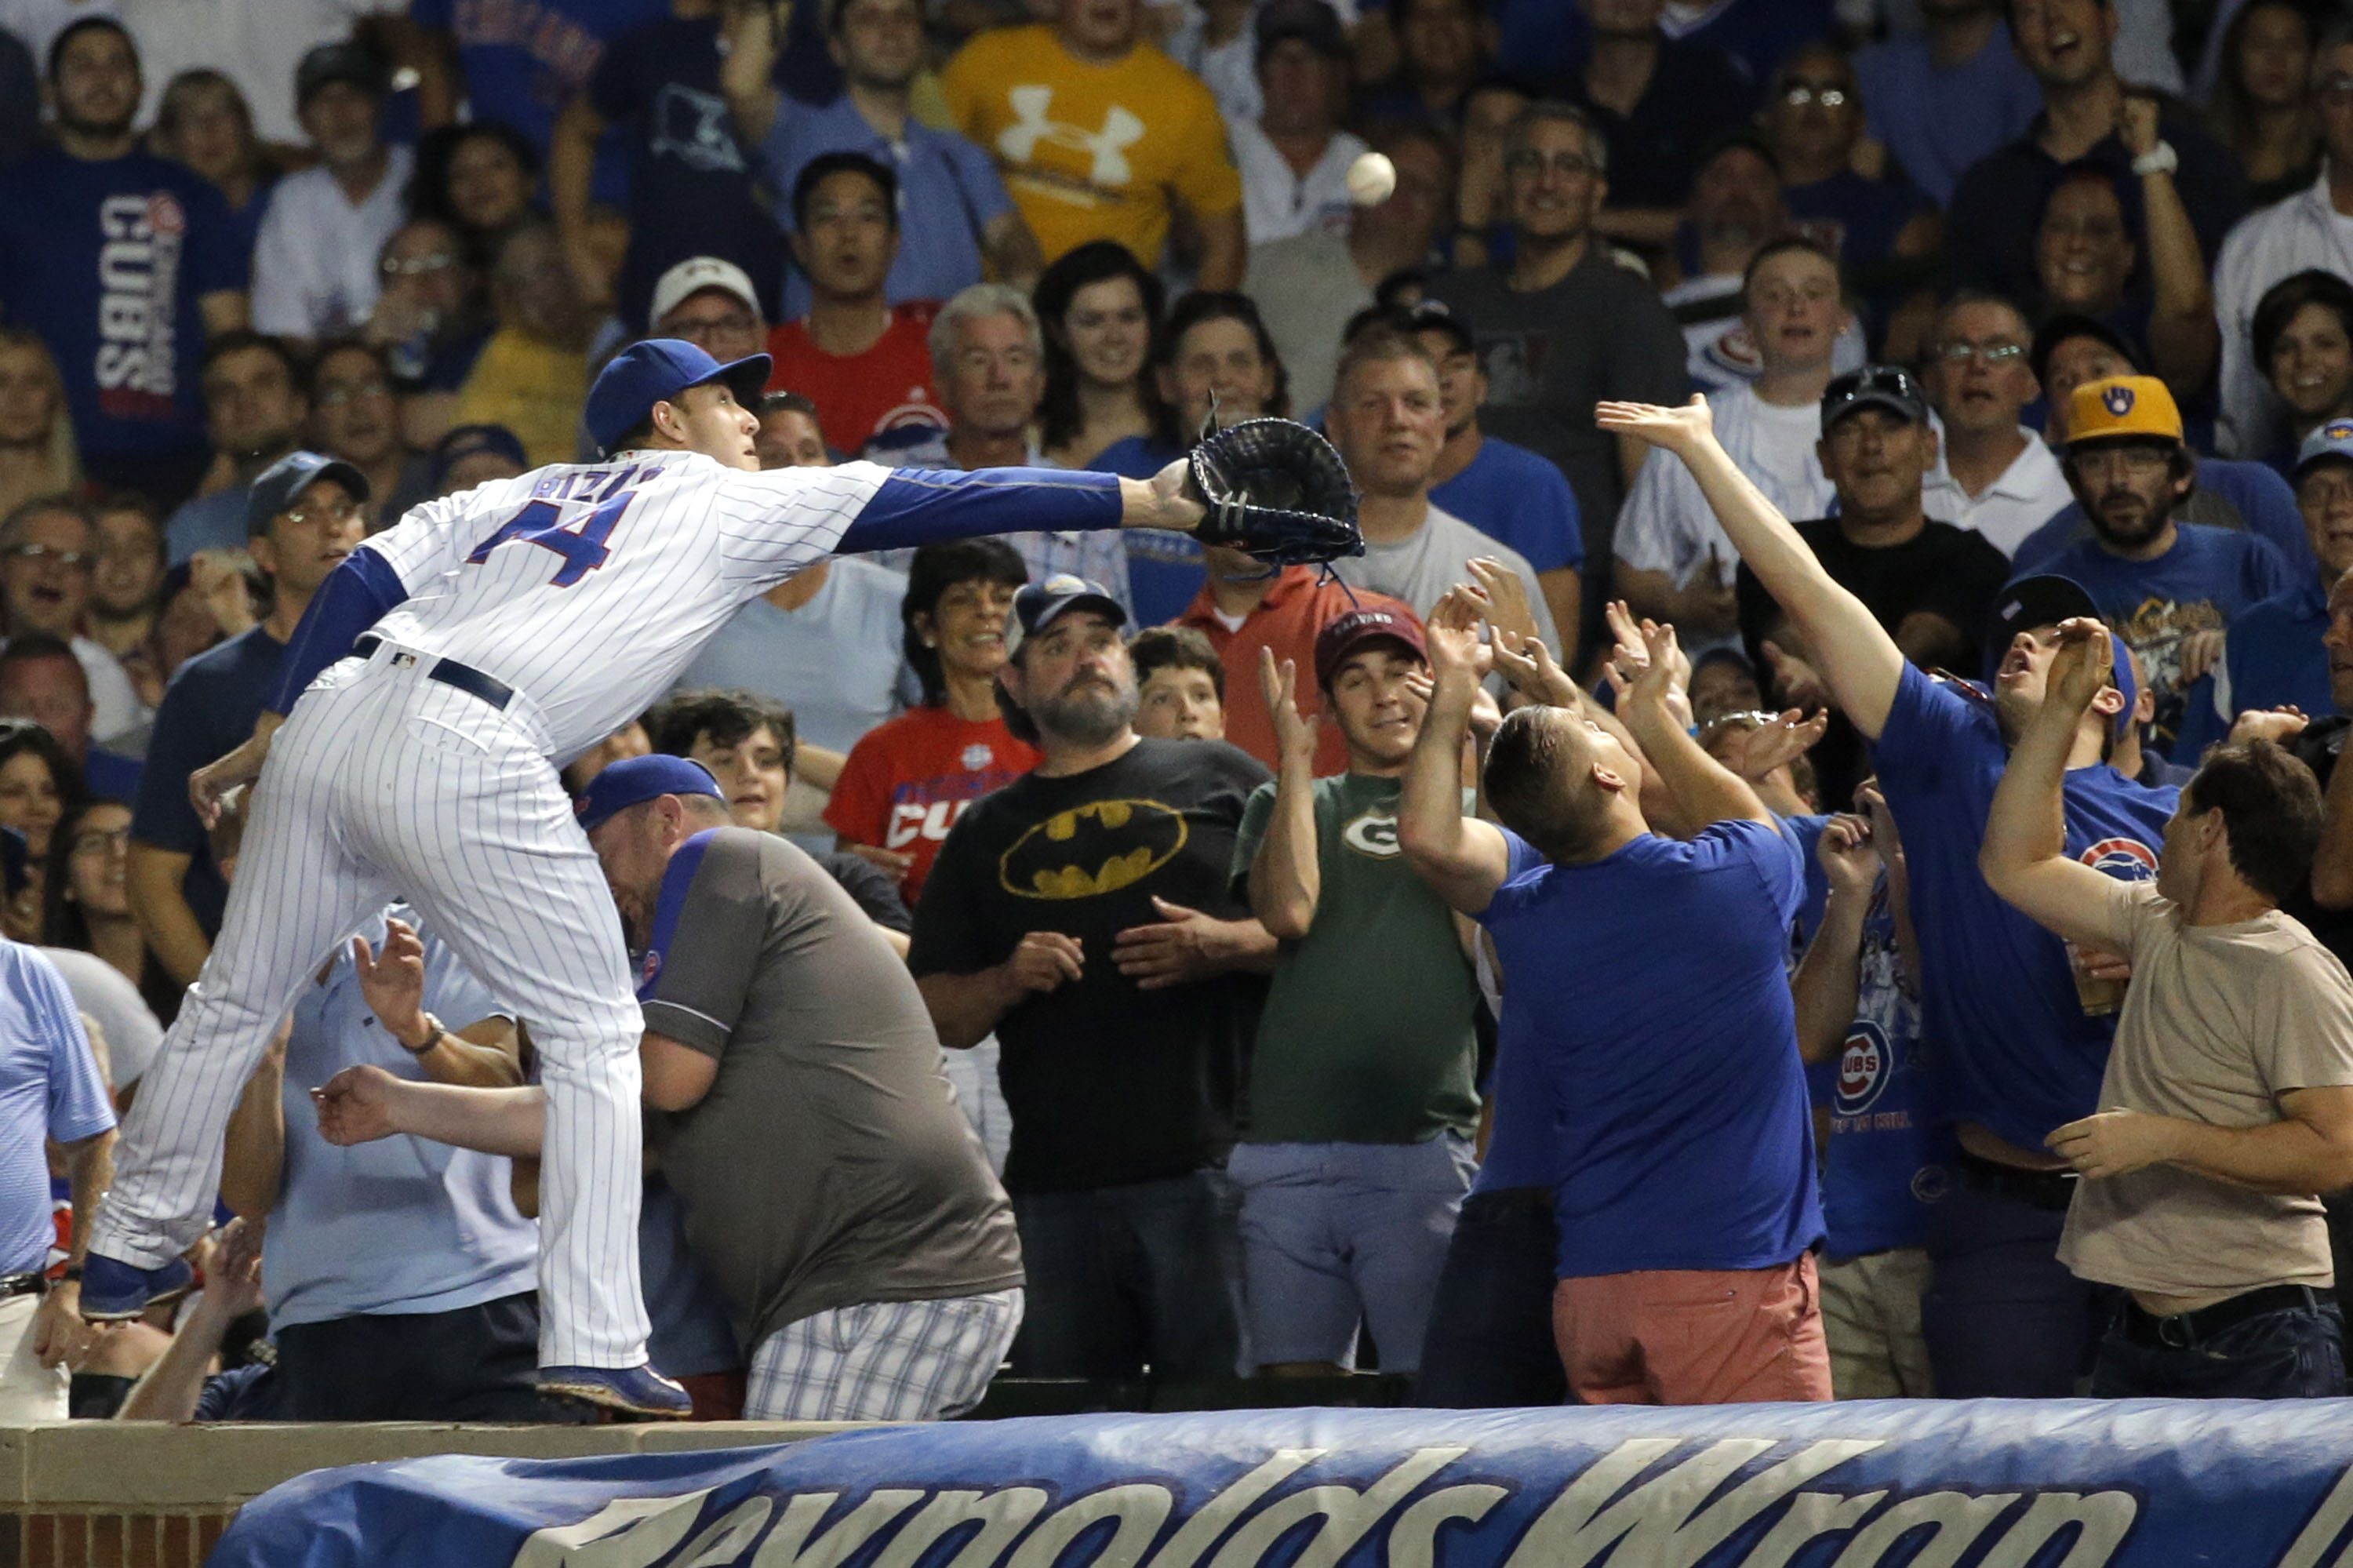 Anthony Rizzo's Amazing Catch Topped the List on a Night Full of Great Grabs